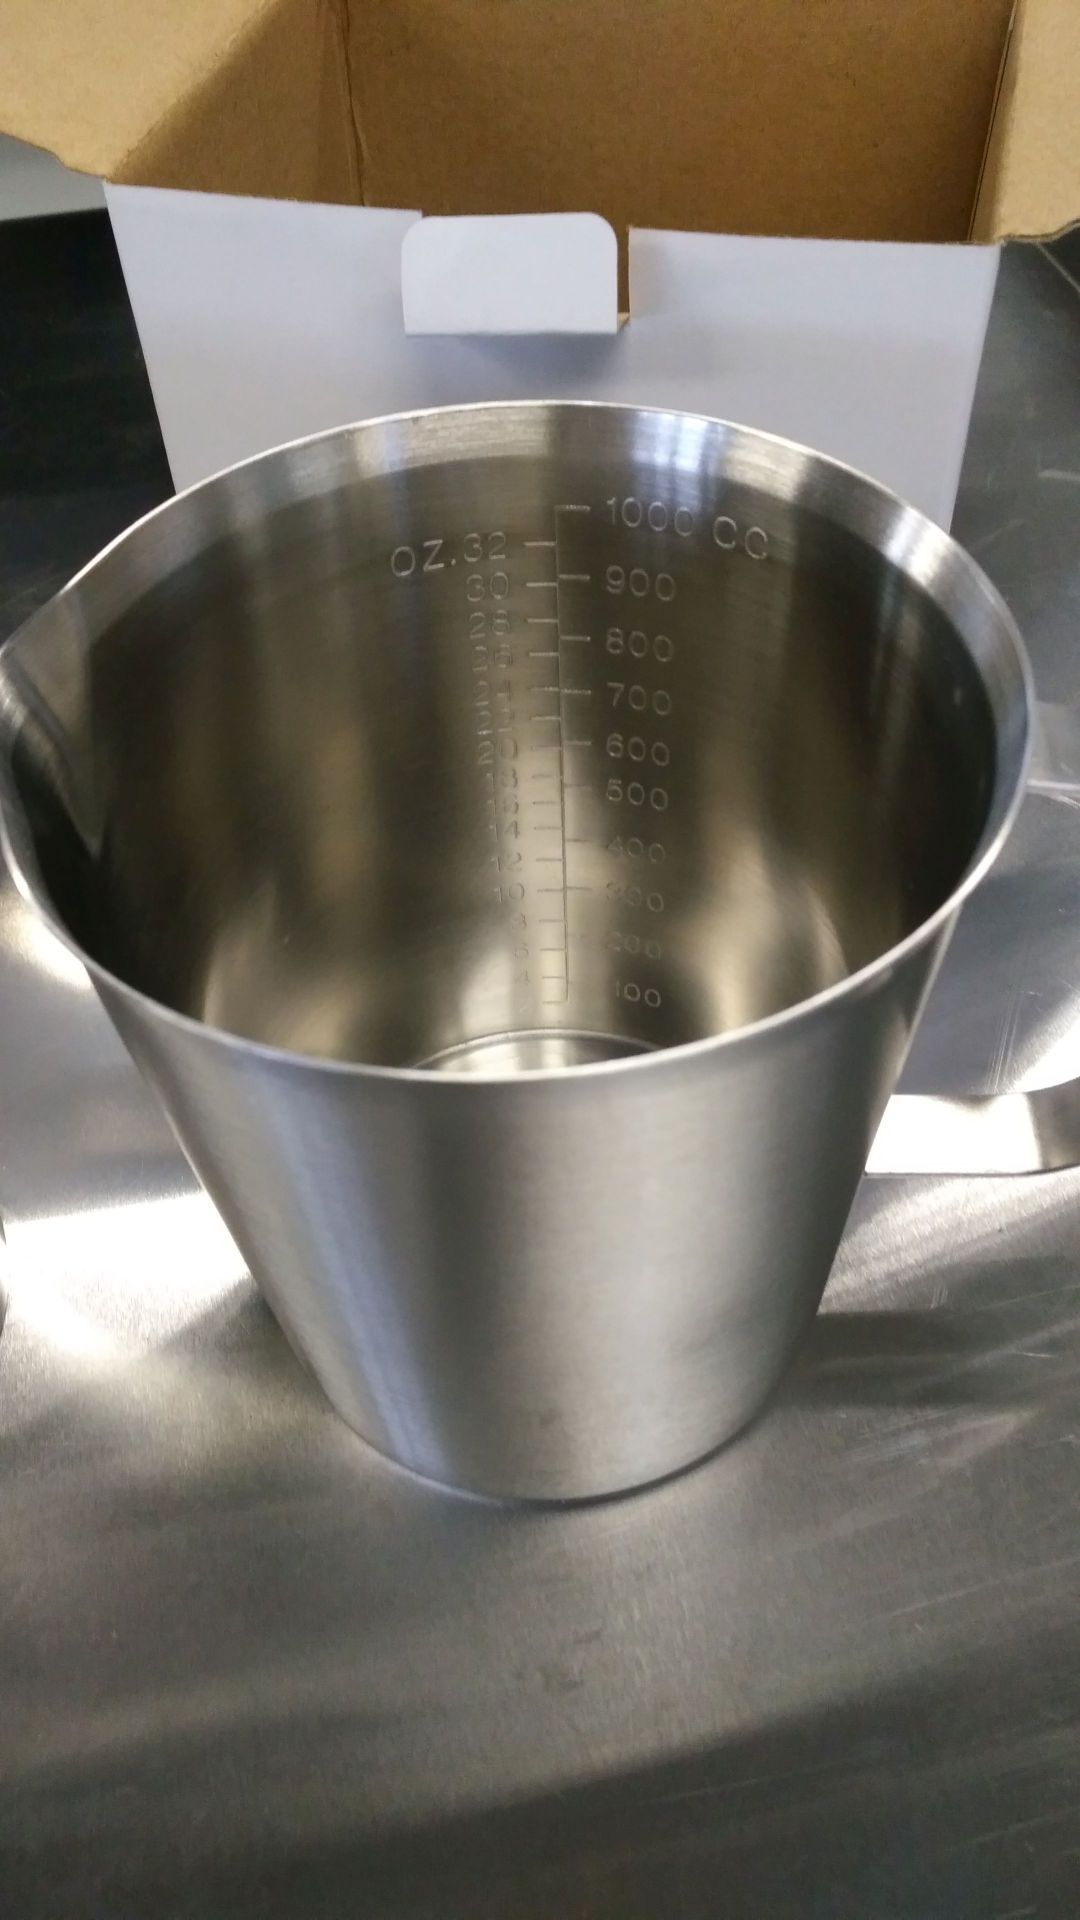 1000ml Heavy Duty Stainless Measures - Lot of 2 - Image 3 of 3